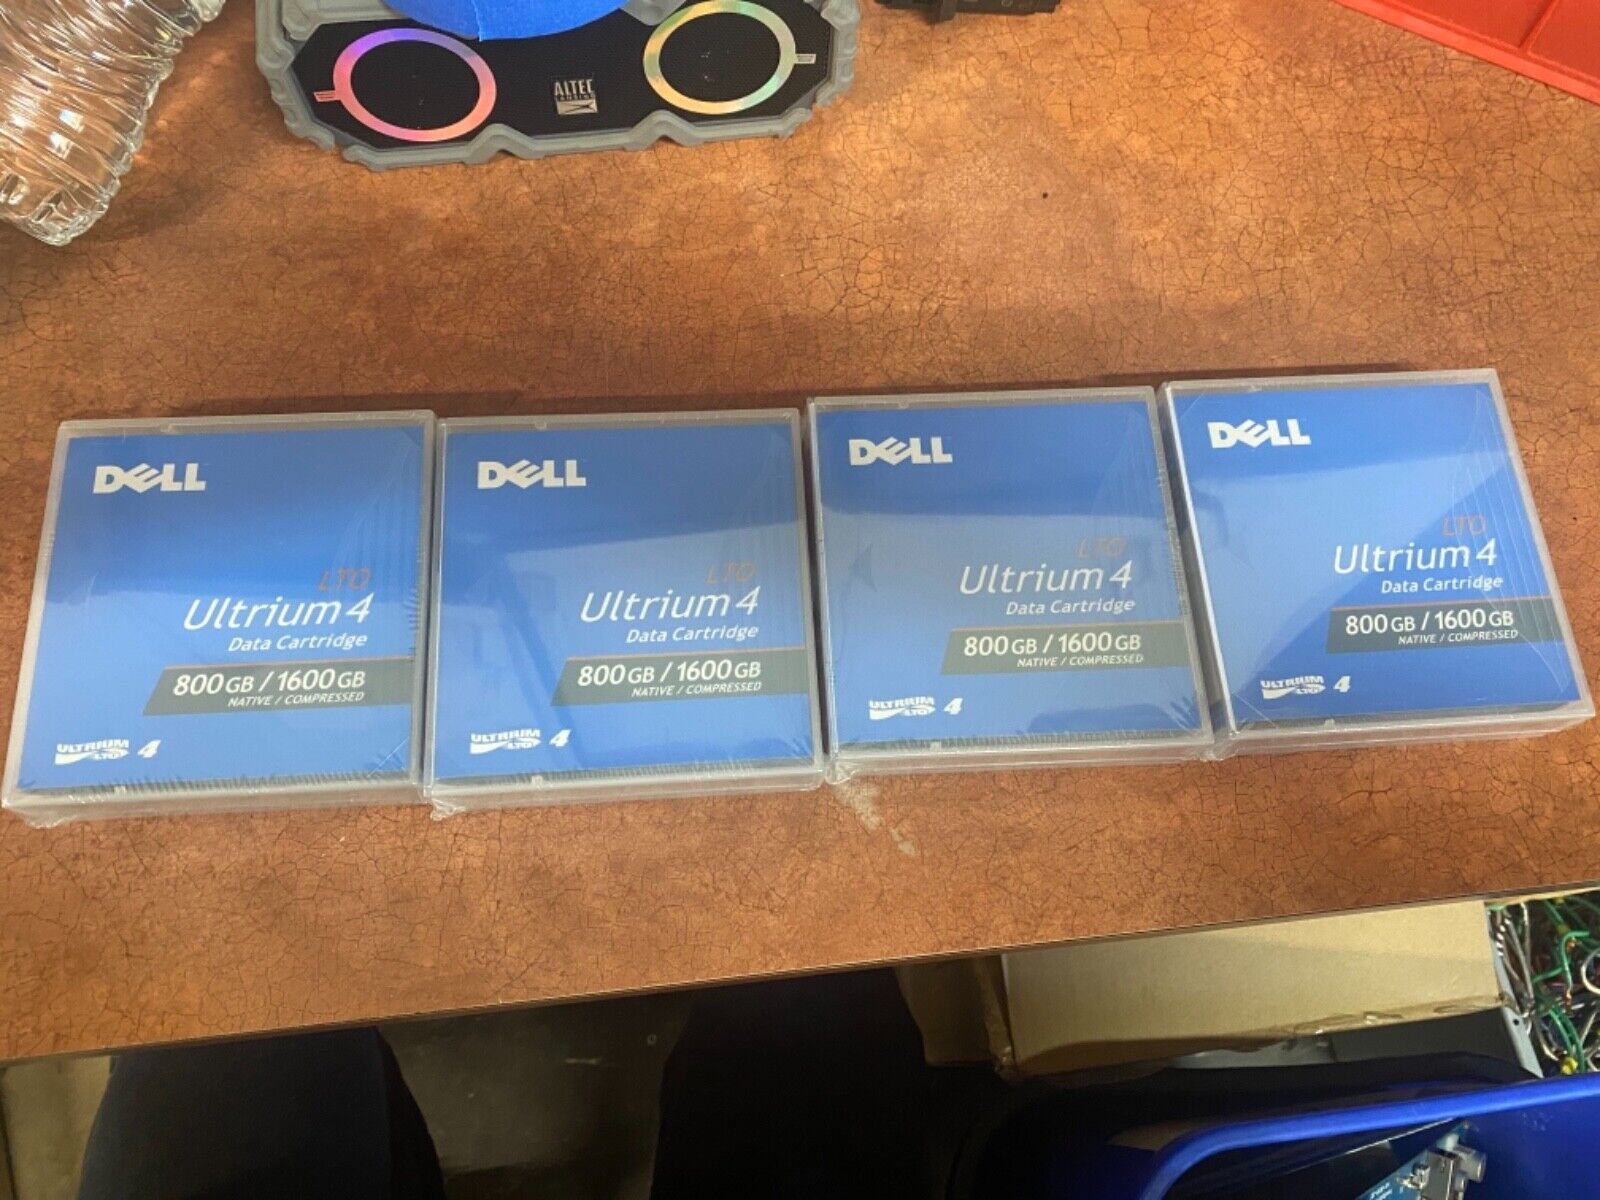 Lot of 4 Dell LTO-Ultrium 4 Data Cartridges 800GB/1600GB - New Sealed out of box